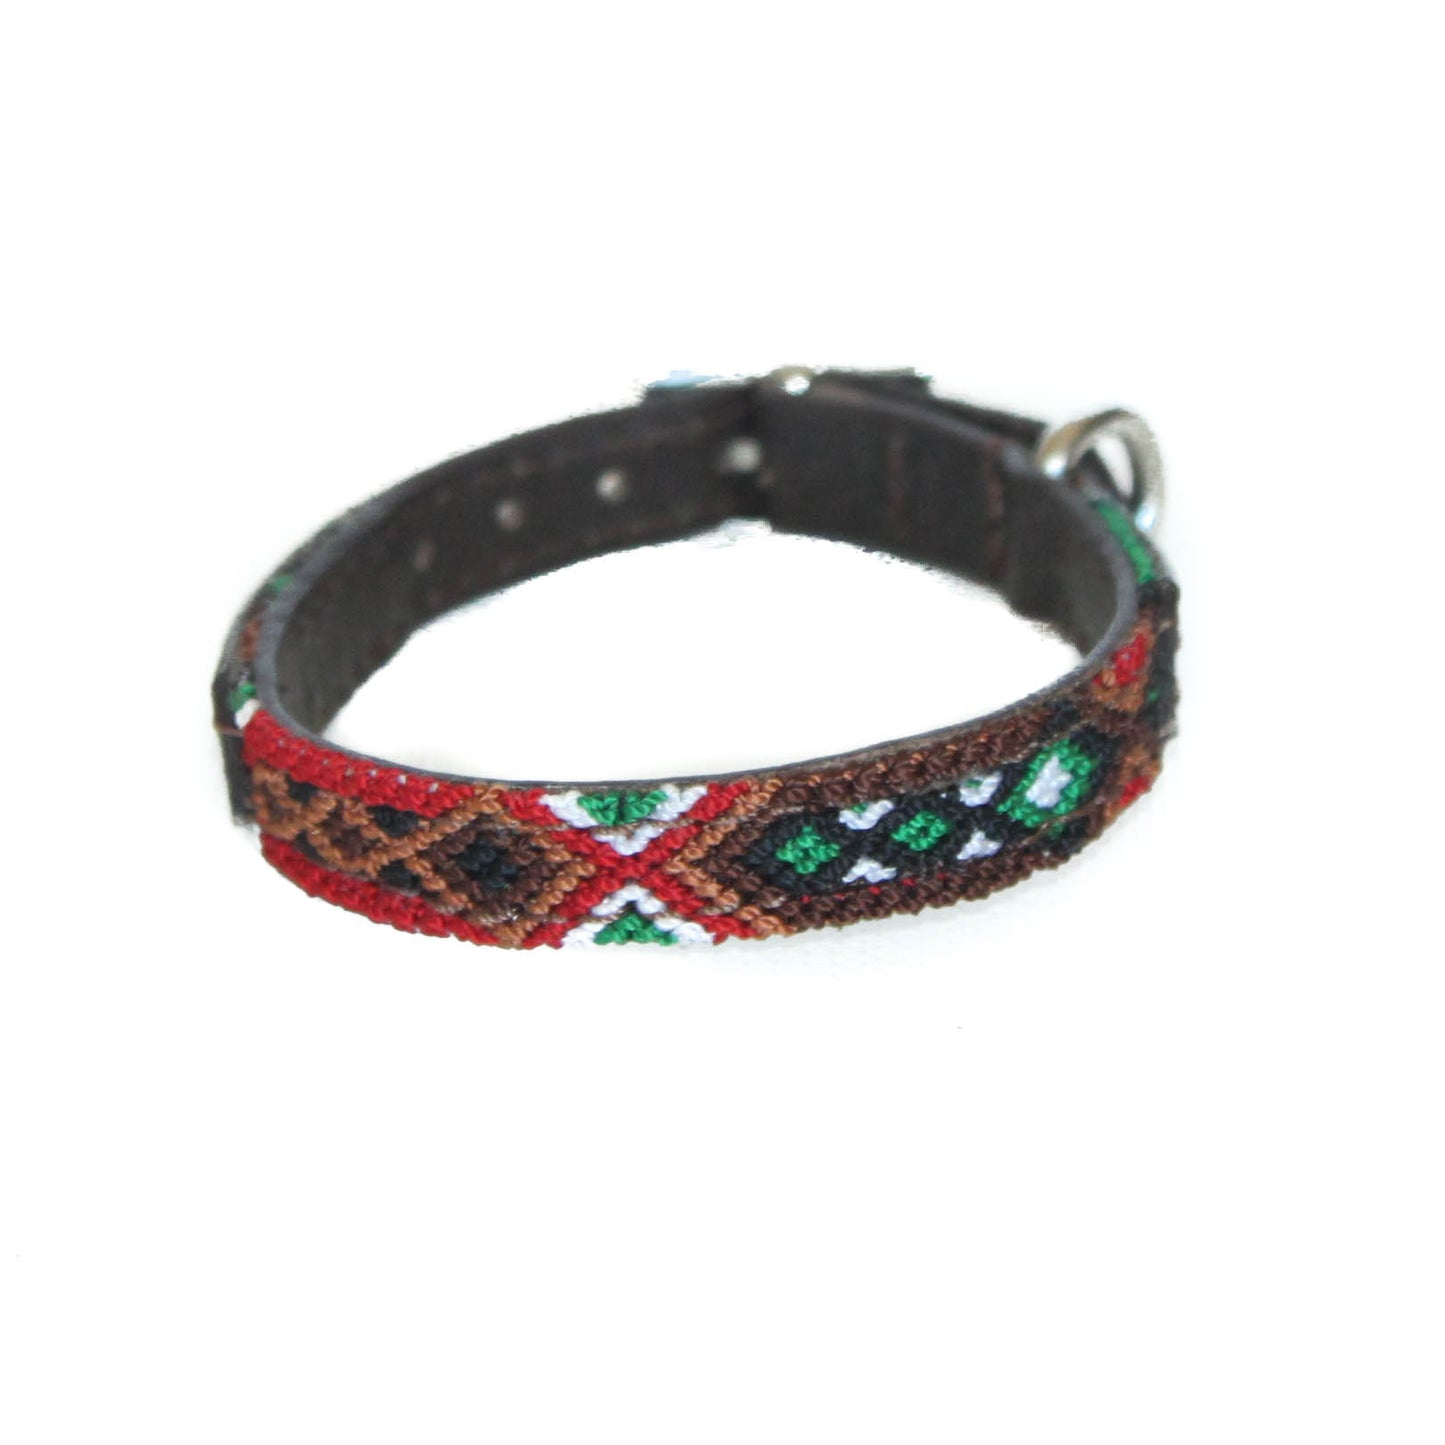 Brick - Embroidered Dog Collar With Leather